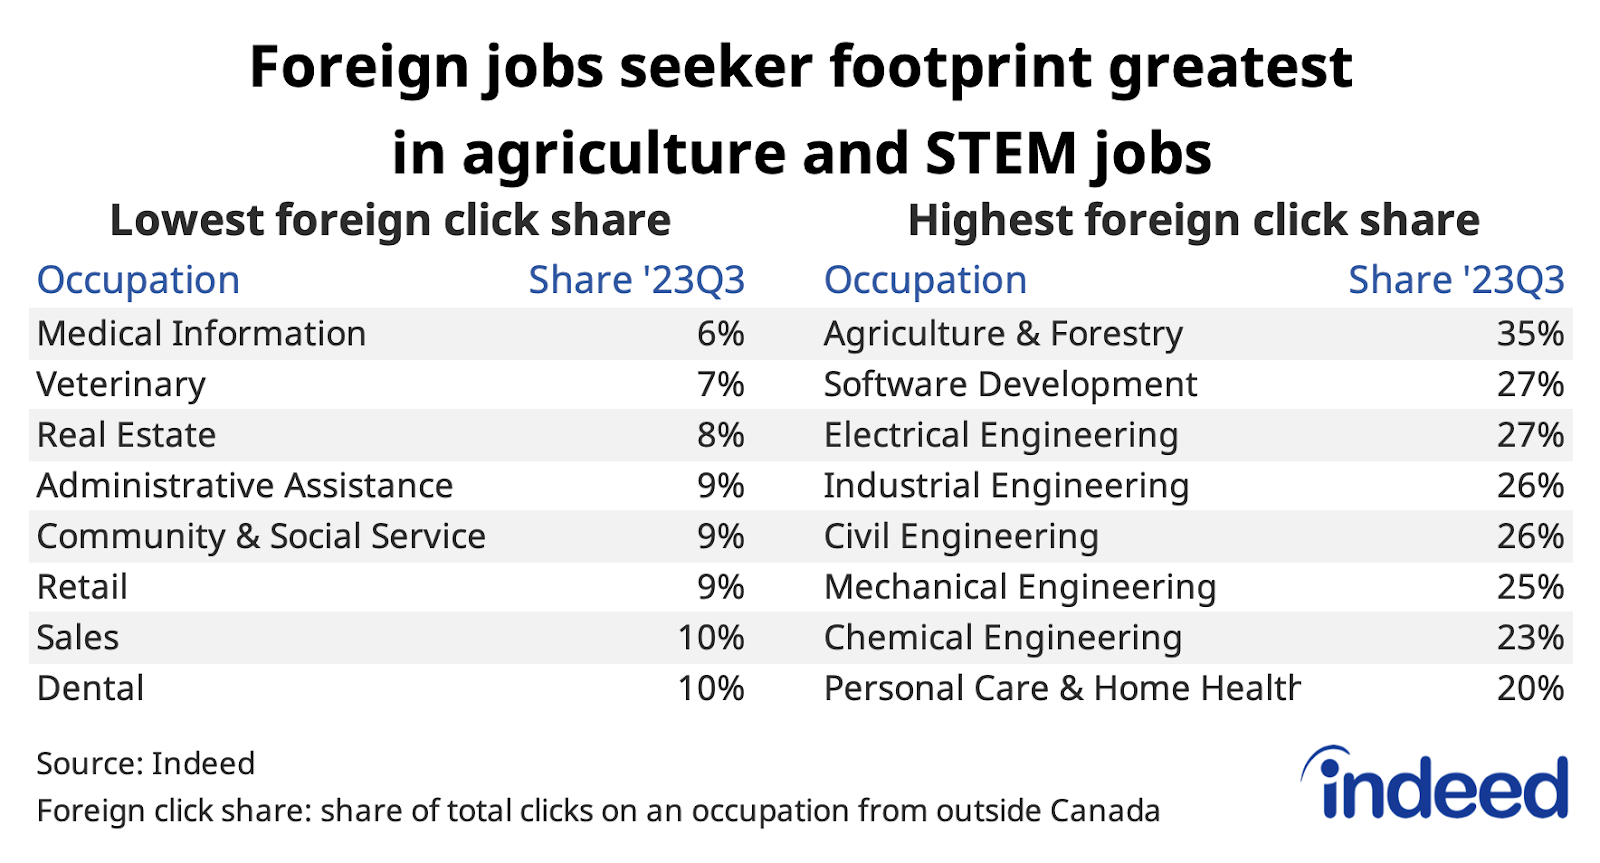 Table titled “Foreign job seeker footprint greatest in agriculture and STEM jobs,” shows the highest and lowest share of foreign clicks on Canadian job postings by occupational sector in 2023Q3. The highest foreign click shares were in agriculture and forestry, software development, and electrical engineering, while the lowest were in medical information, veterinary services, and real estate. 